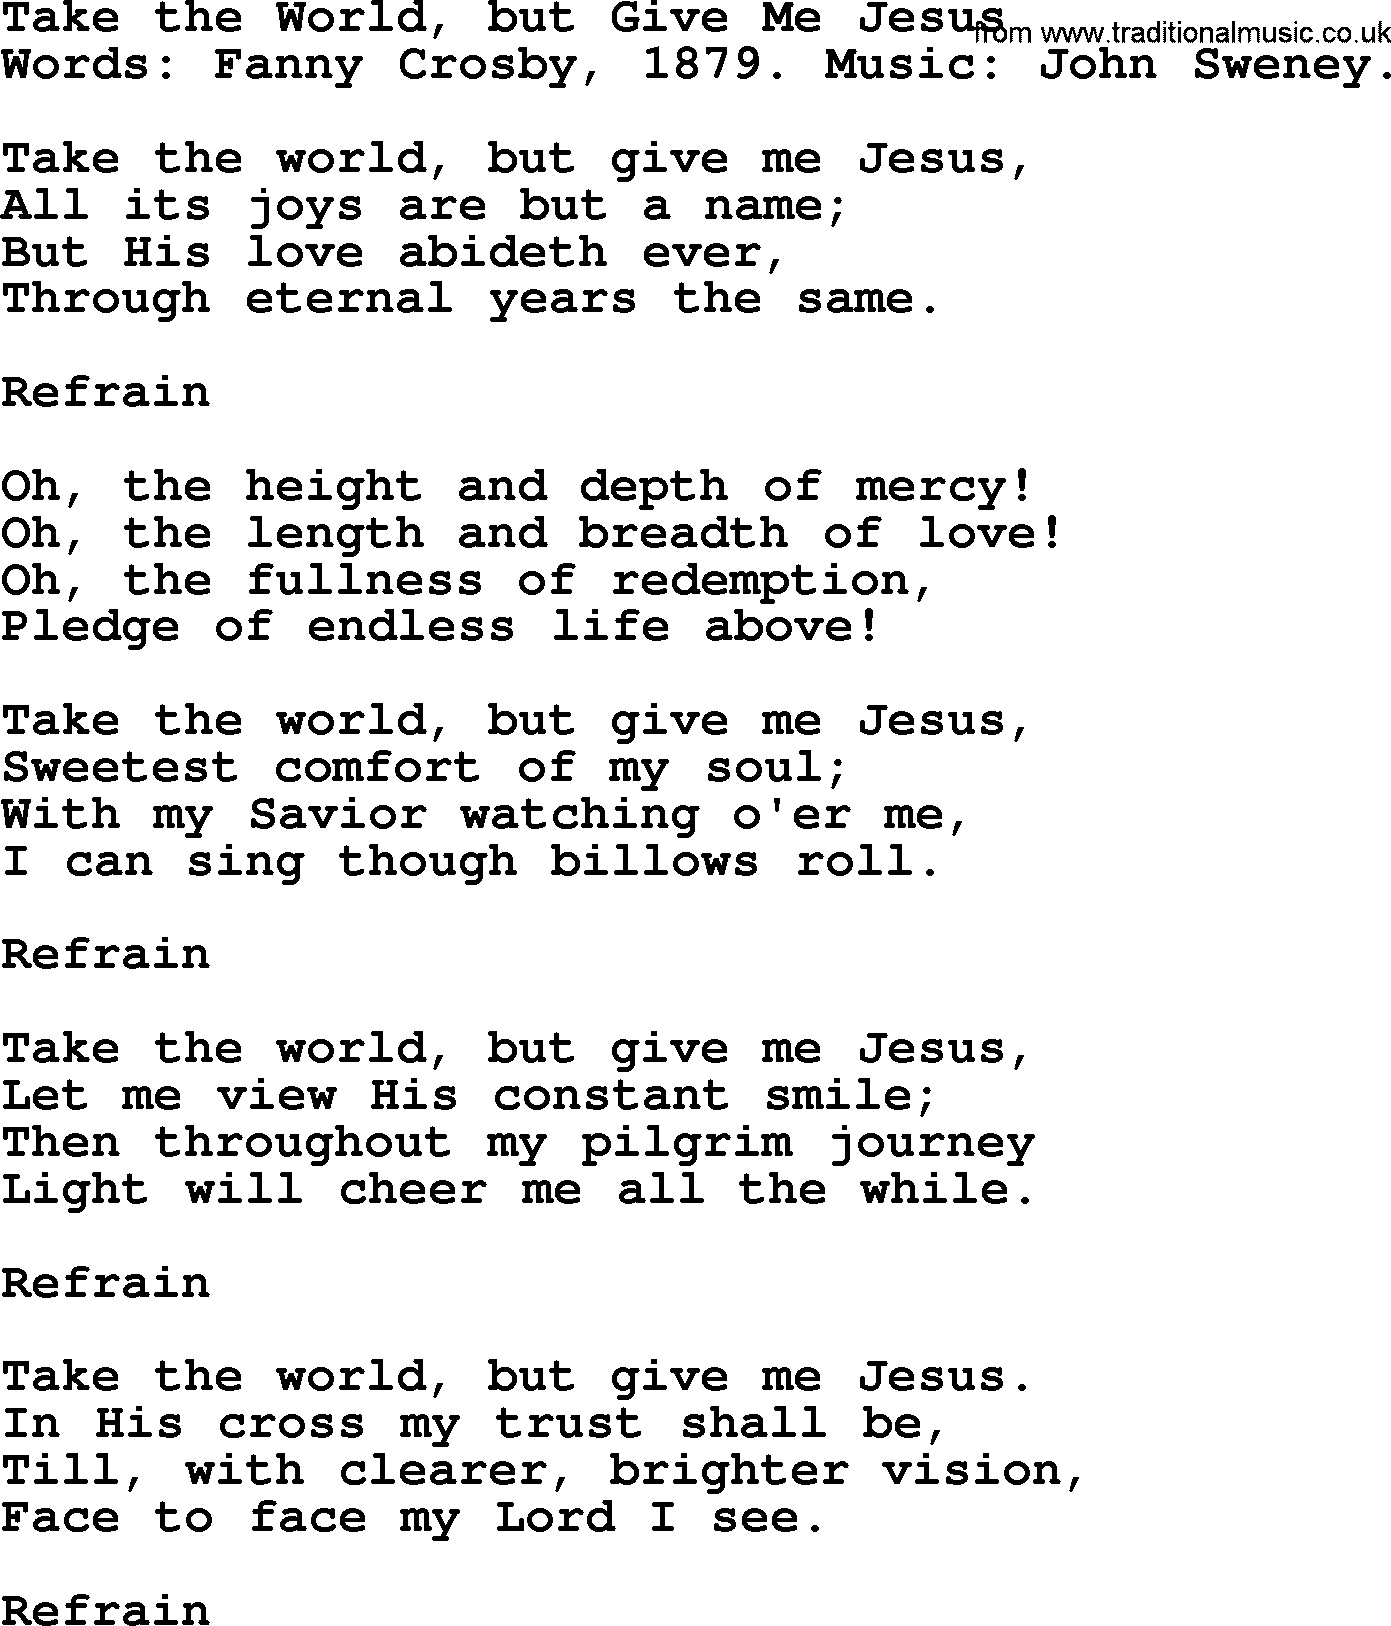 Fanny Crosby song: Take The World, But Give Me Jesus, lyrics